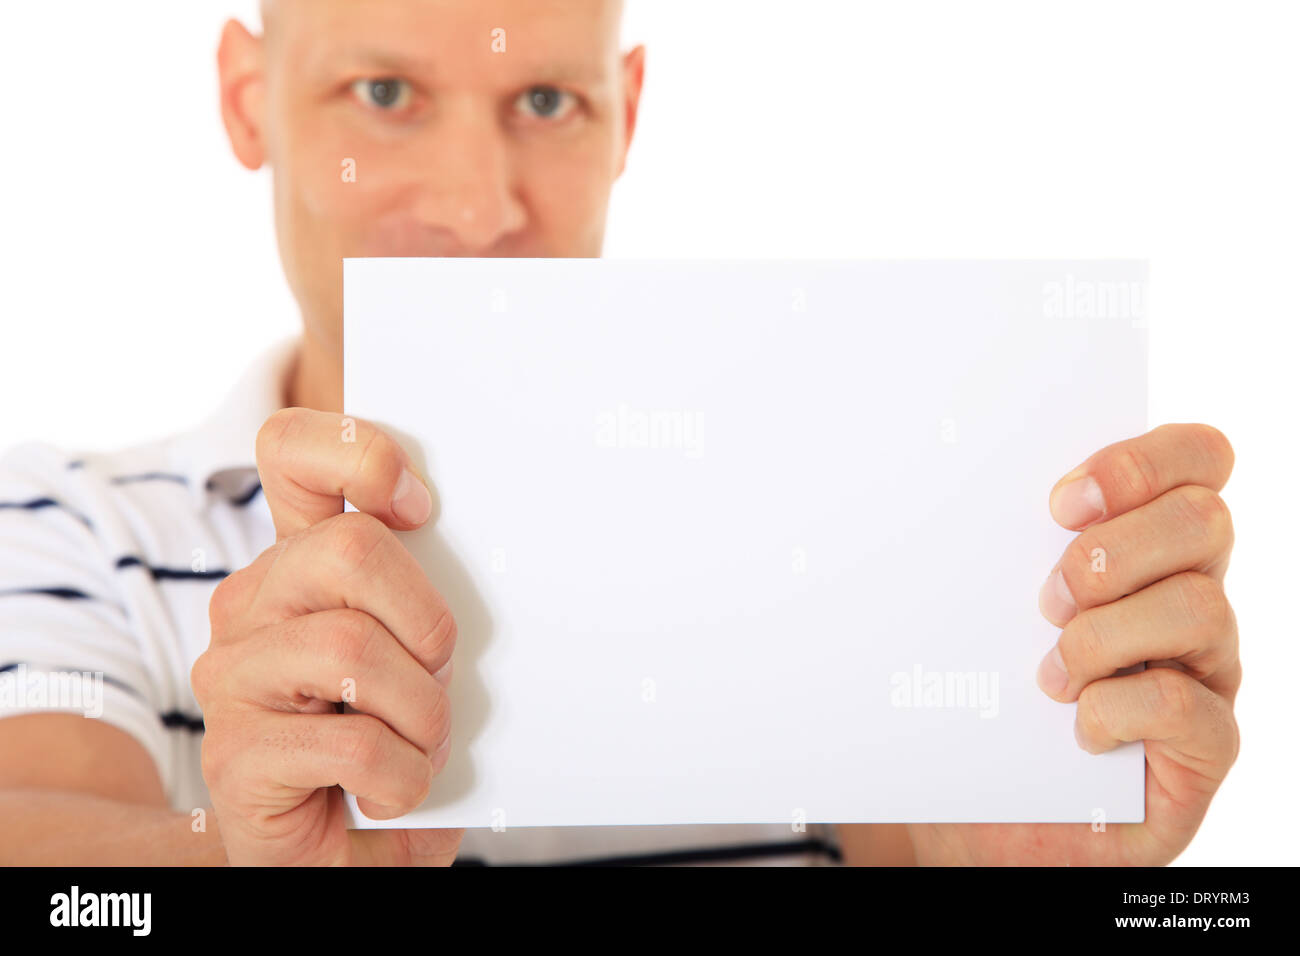 Man holding blank white sign. All on white background. Stock Photo